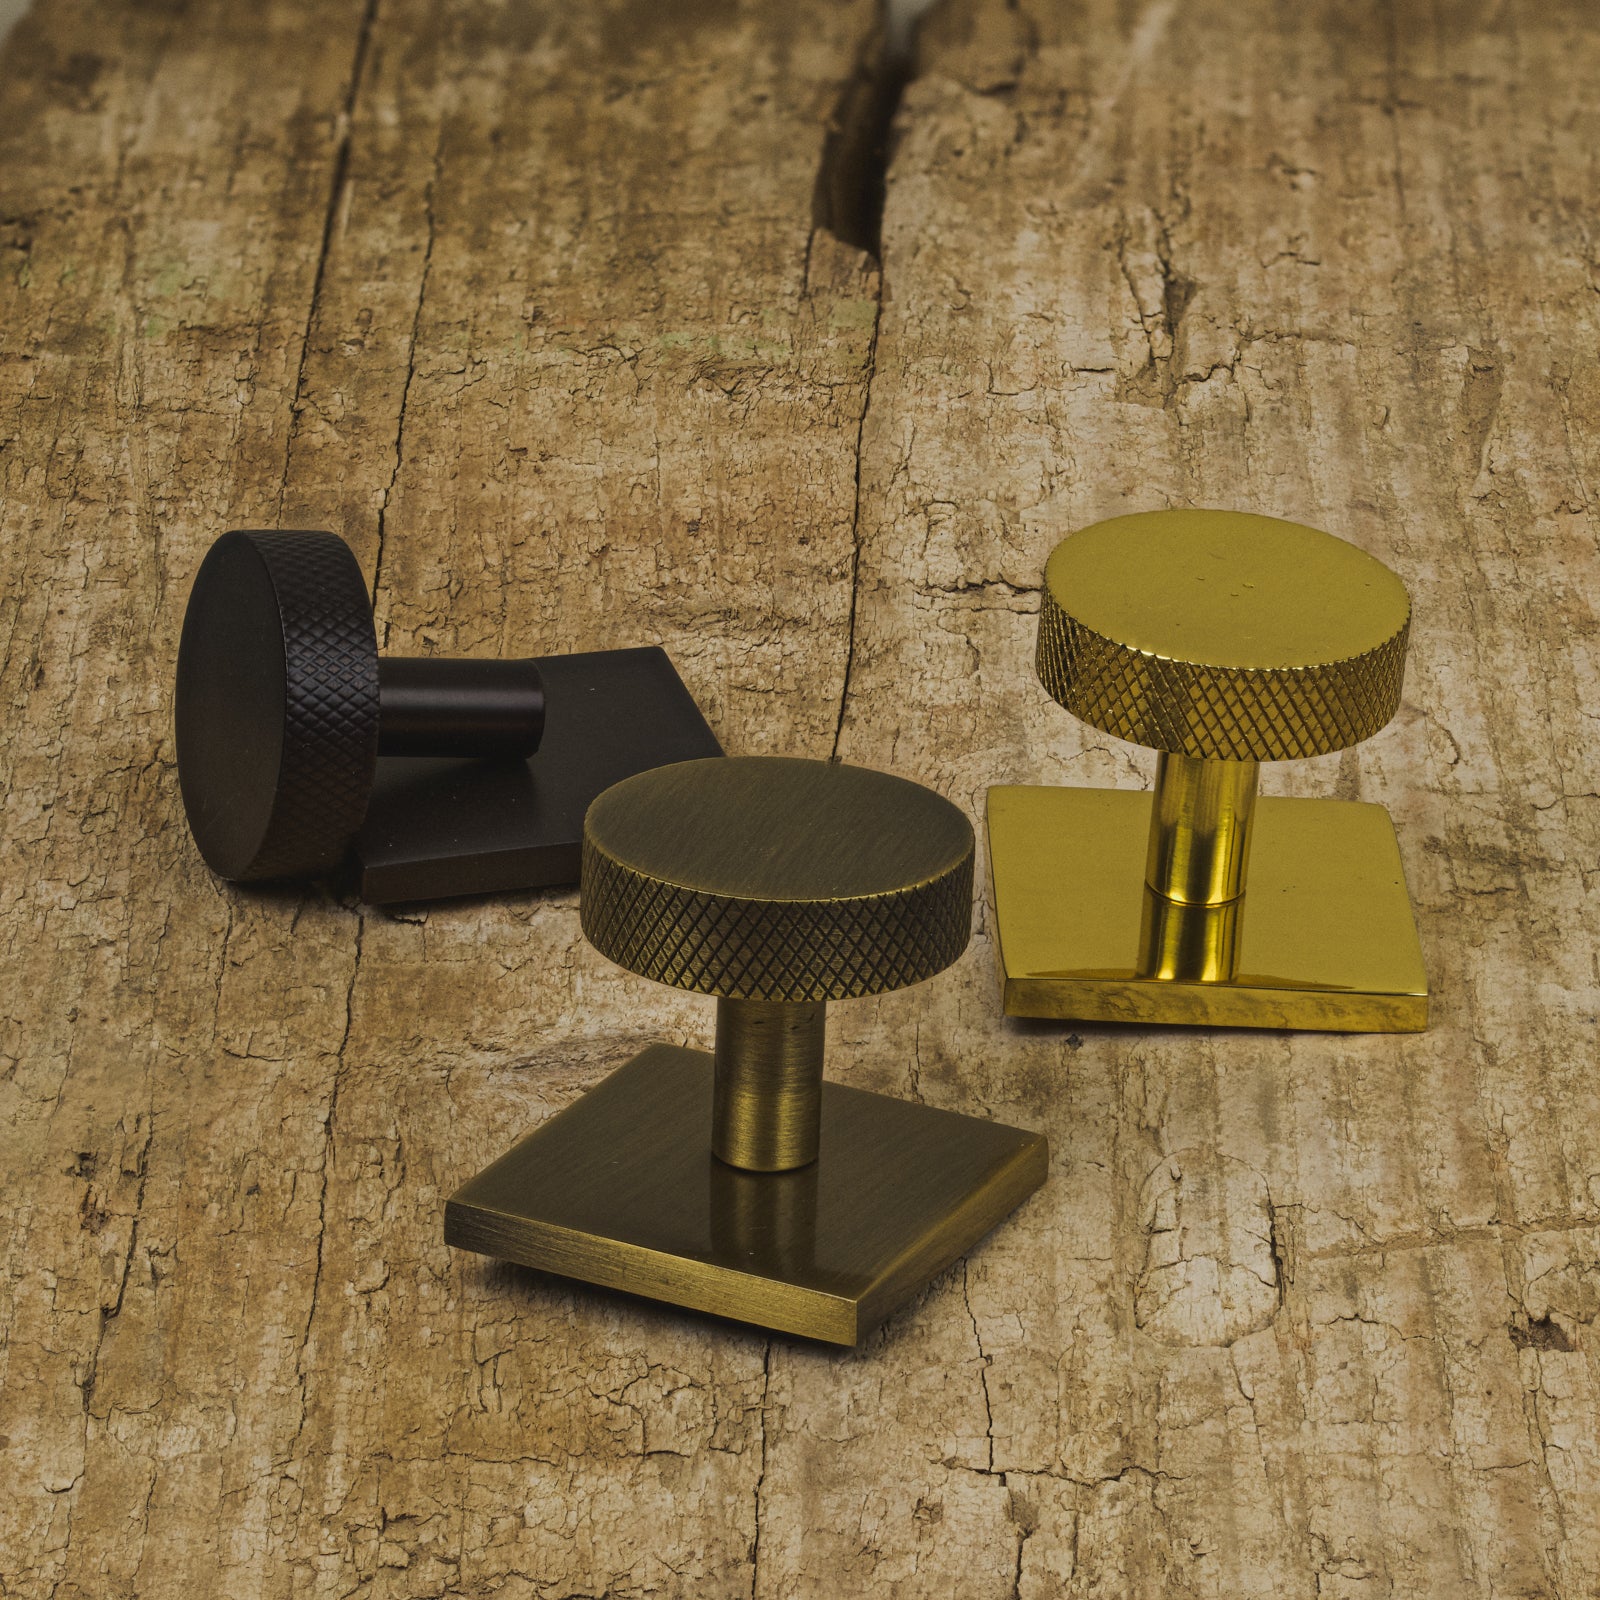 Disc Knurled Cabinet Knobs On Square Backplate